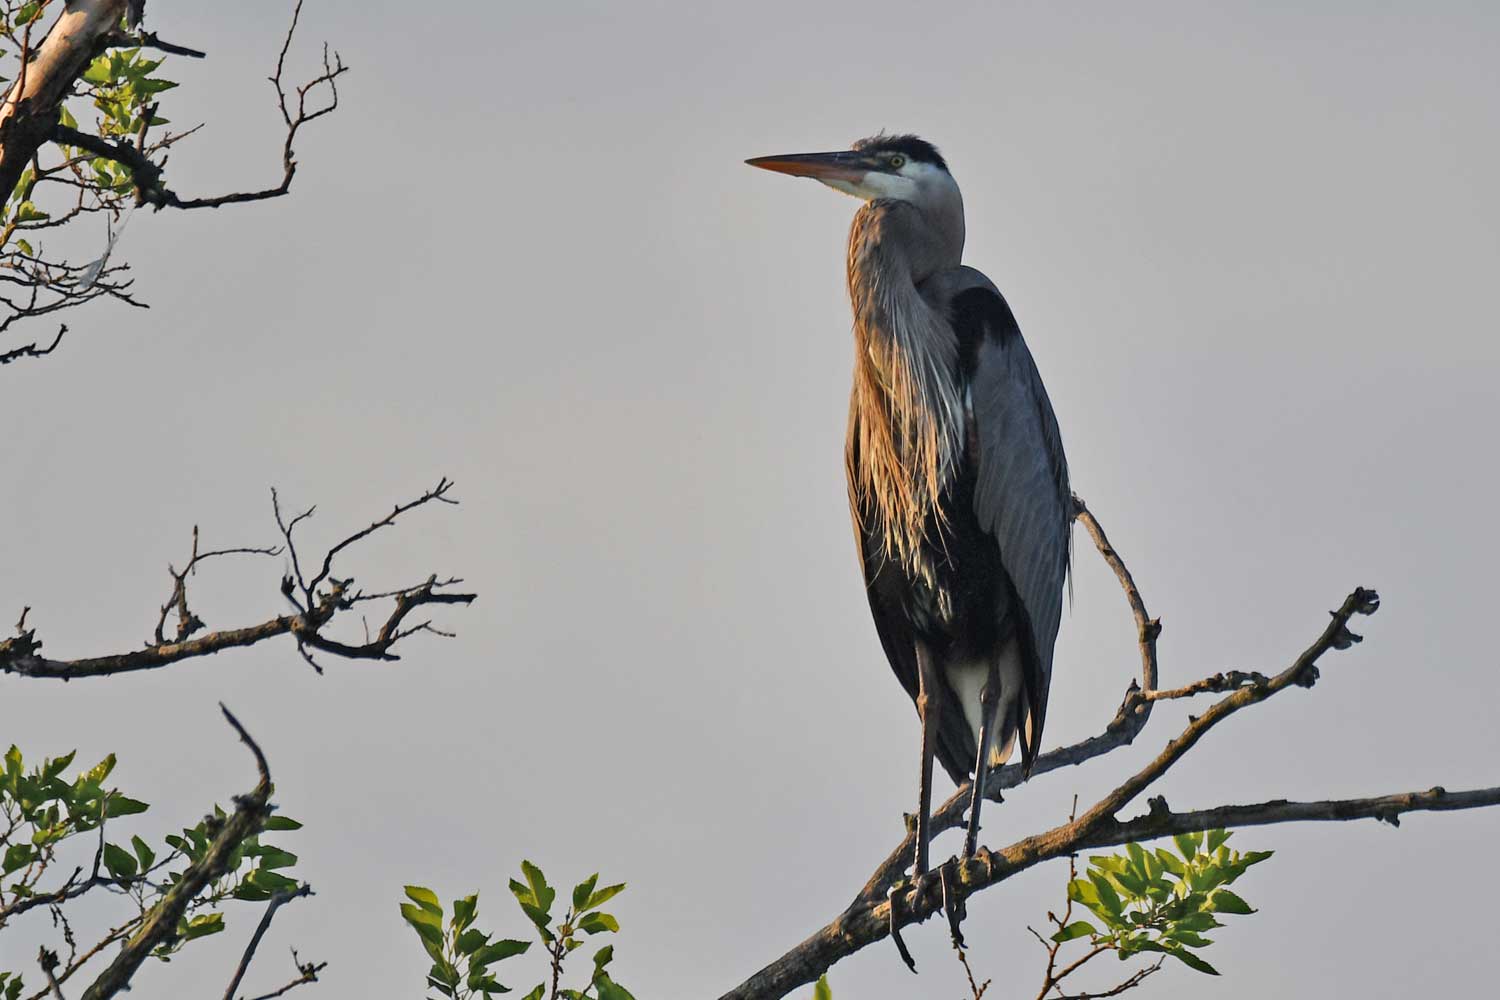 A great blue heron in a tree.